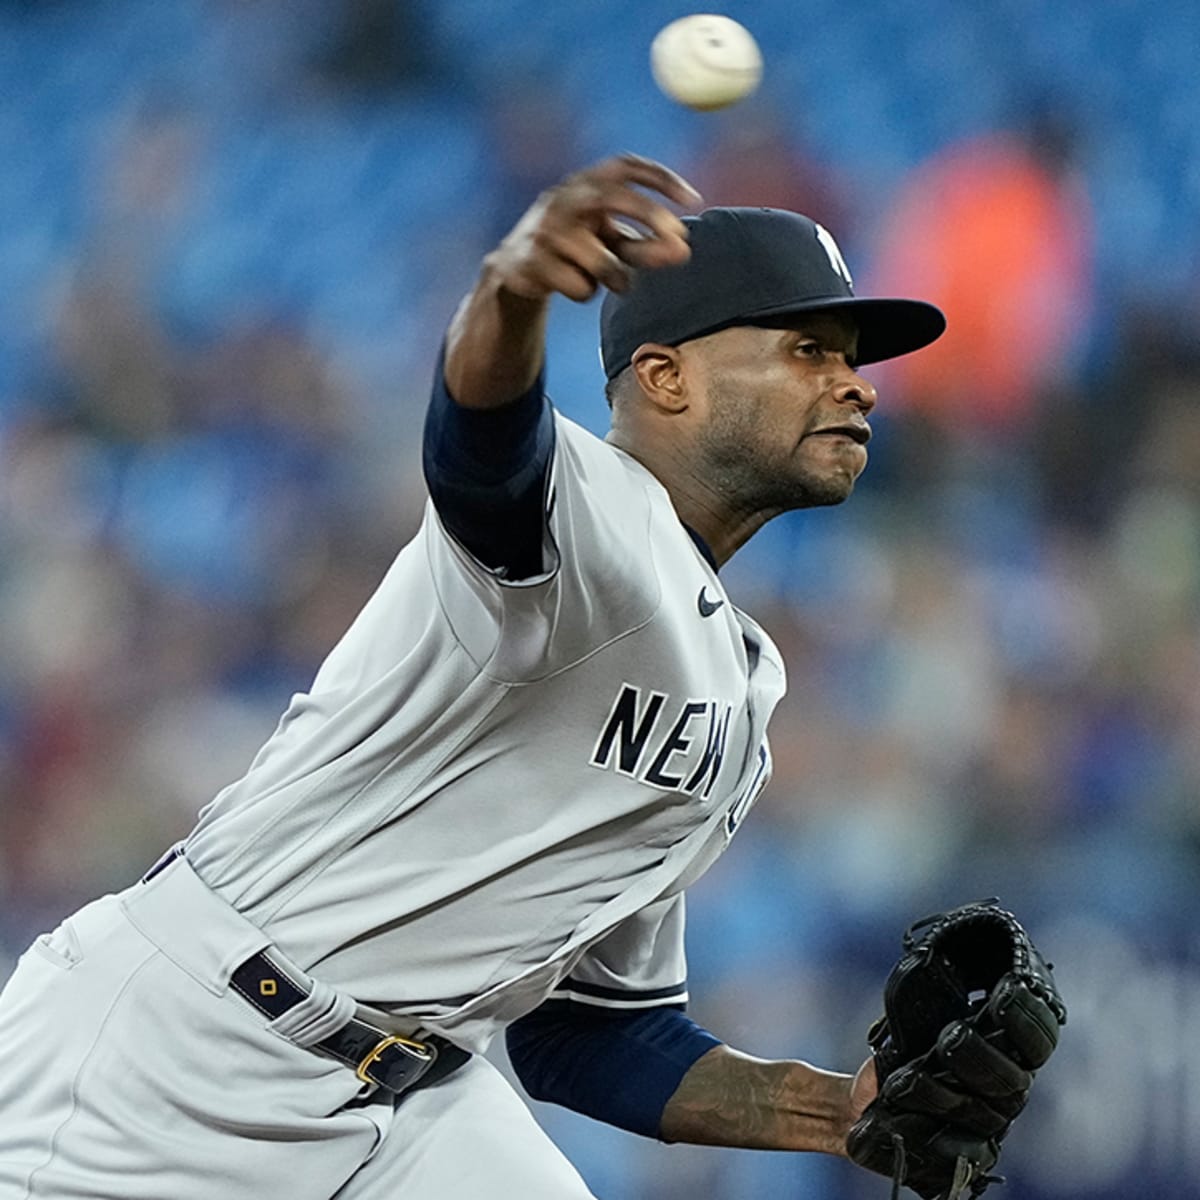 Yankees pitcher Germán suspended 10 games by MLB for using foreign